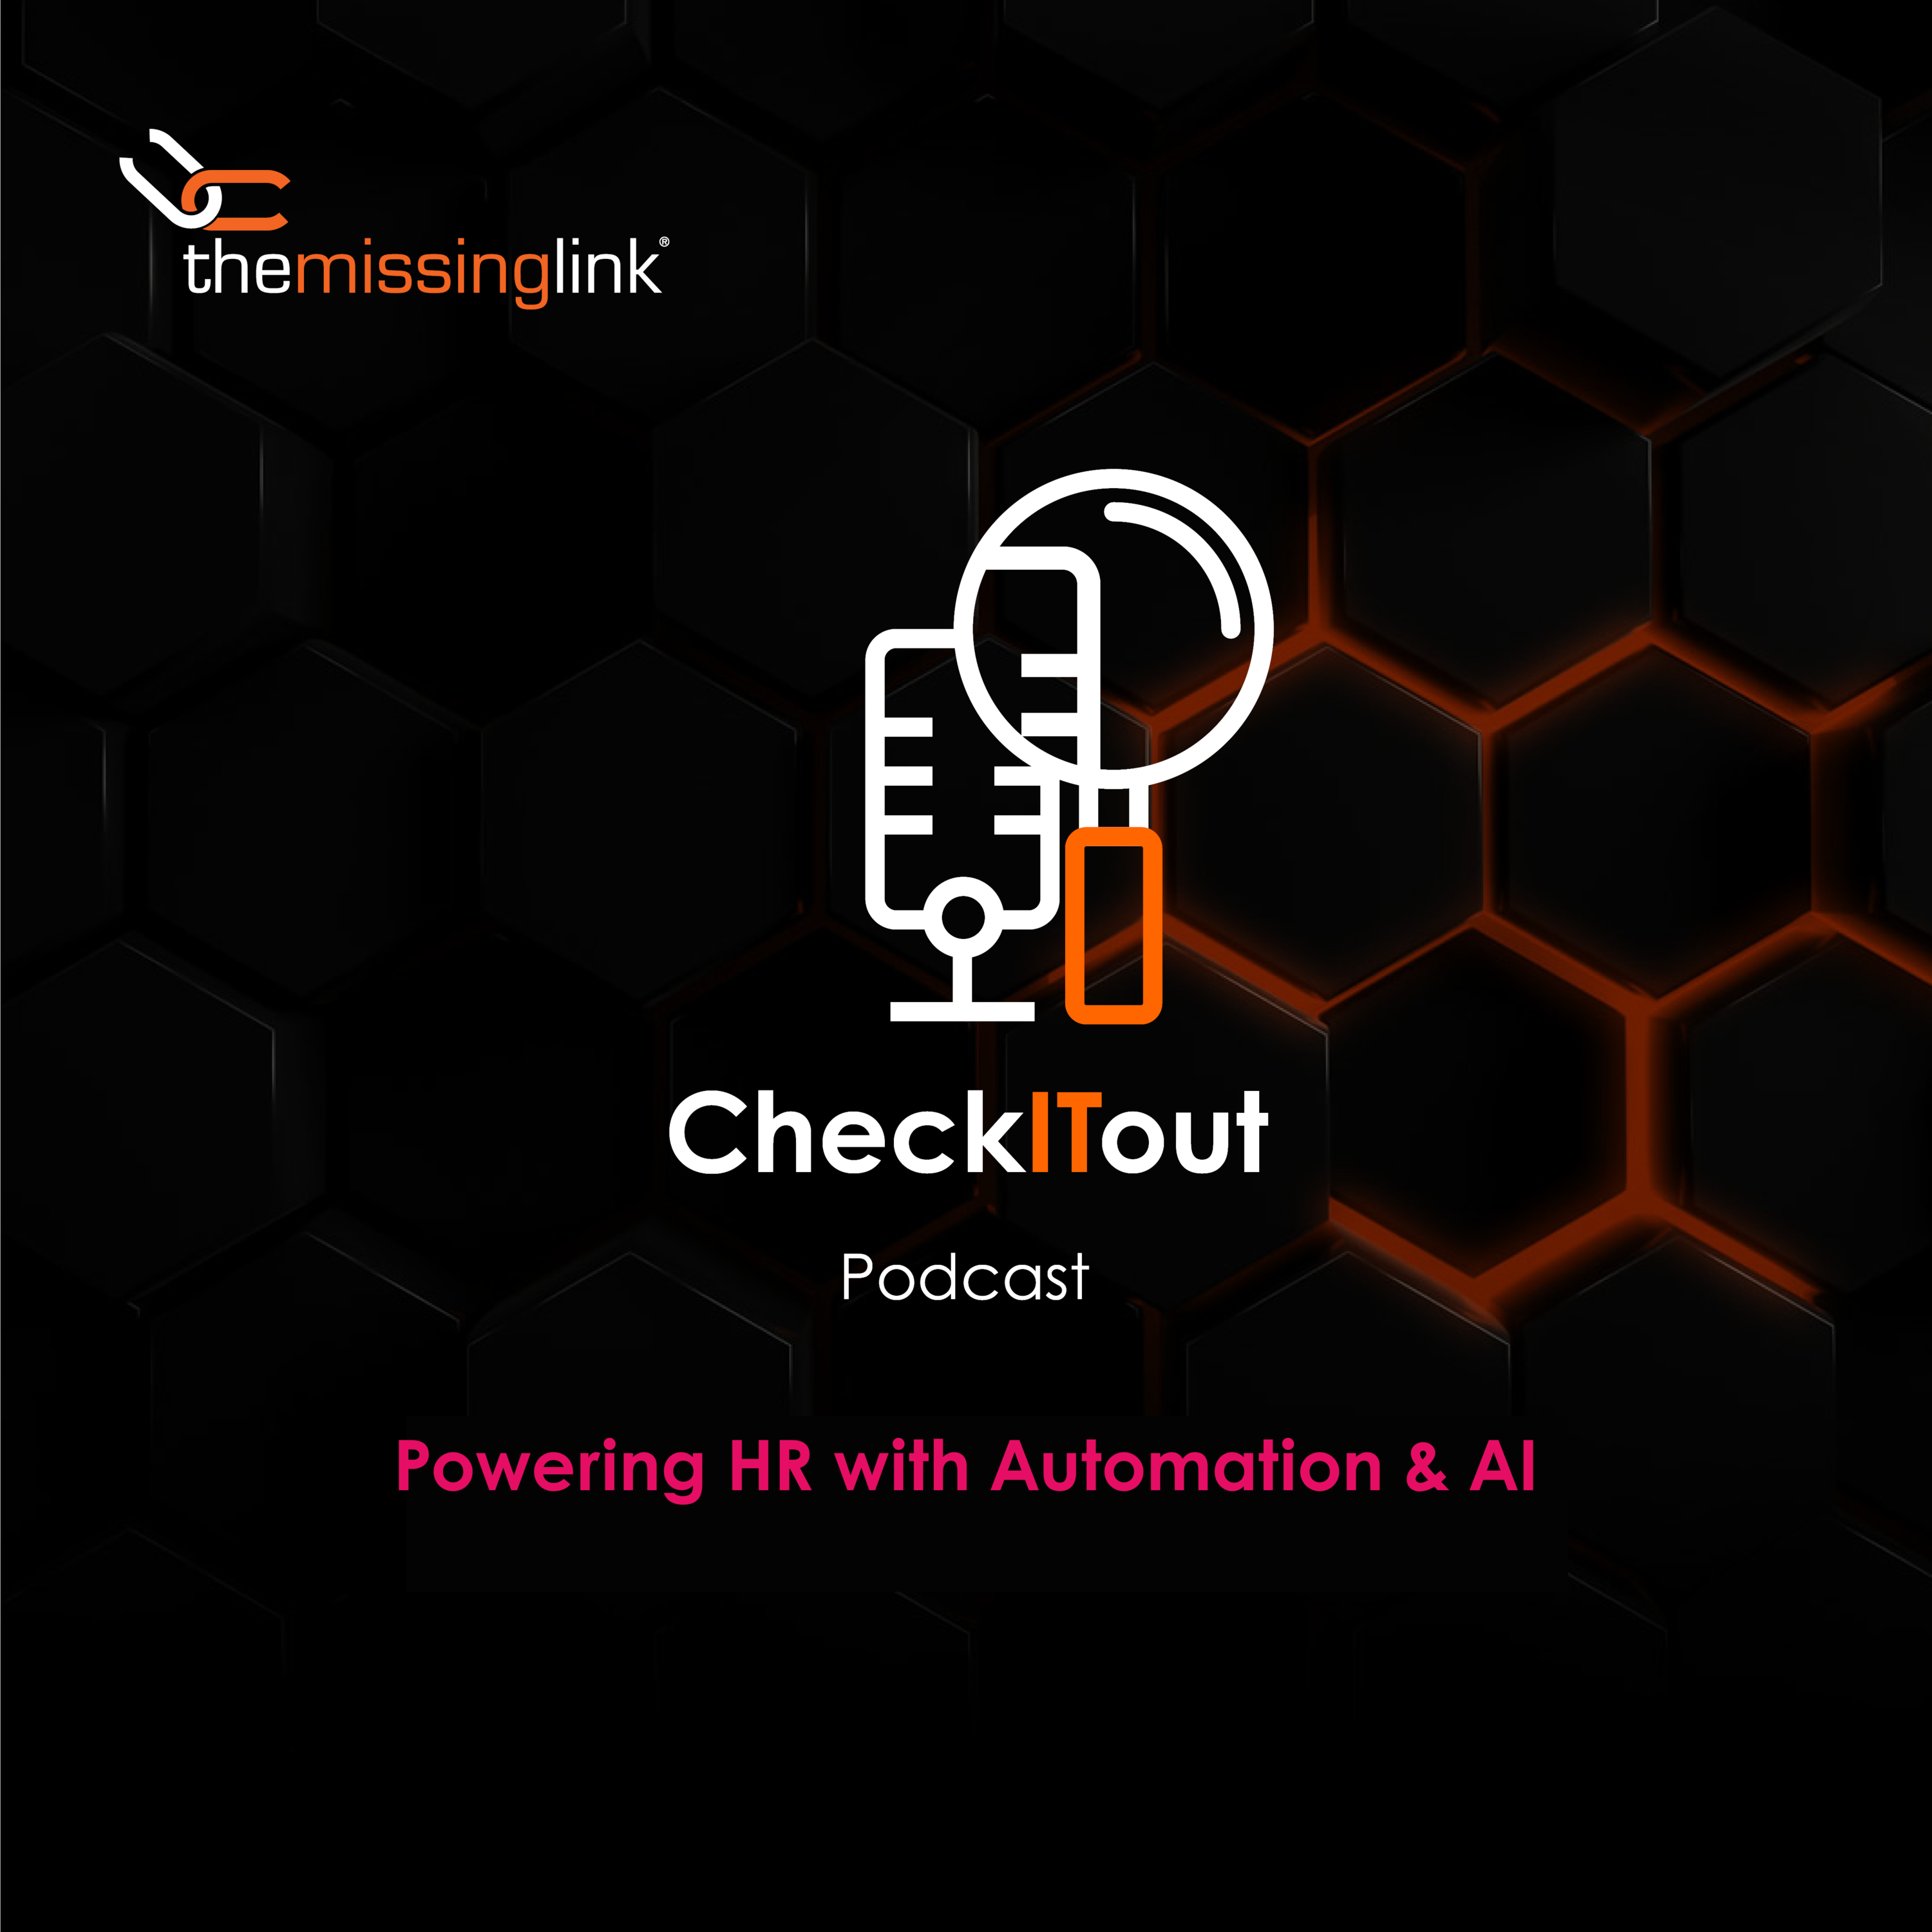 Powering HR with Automation & AI